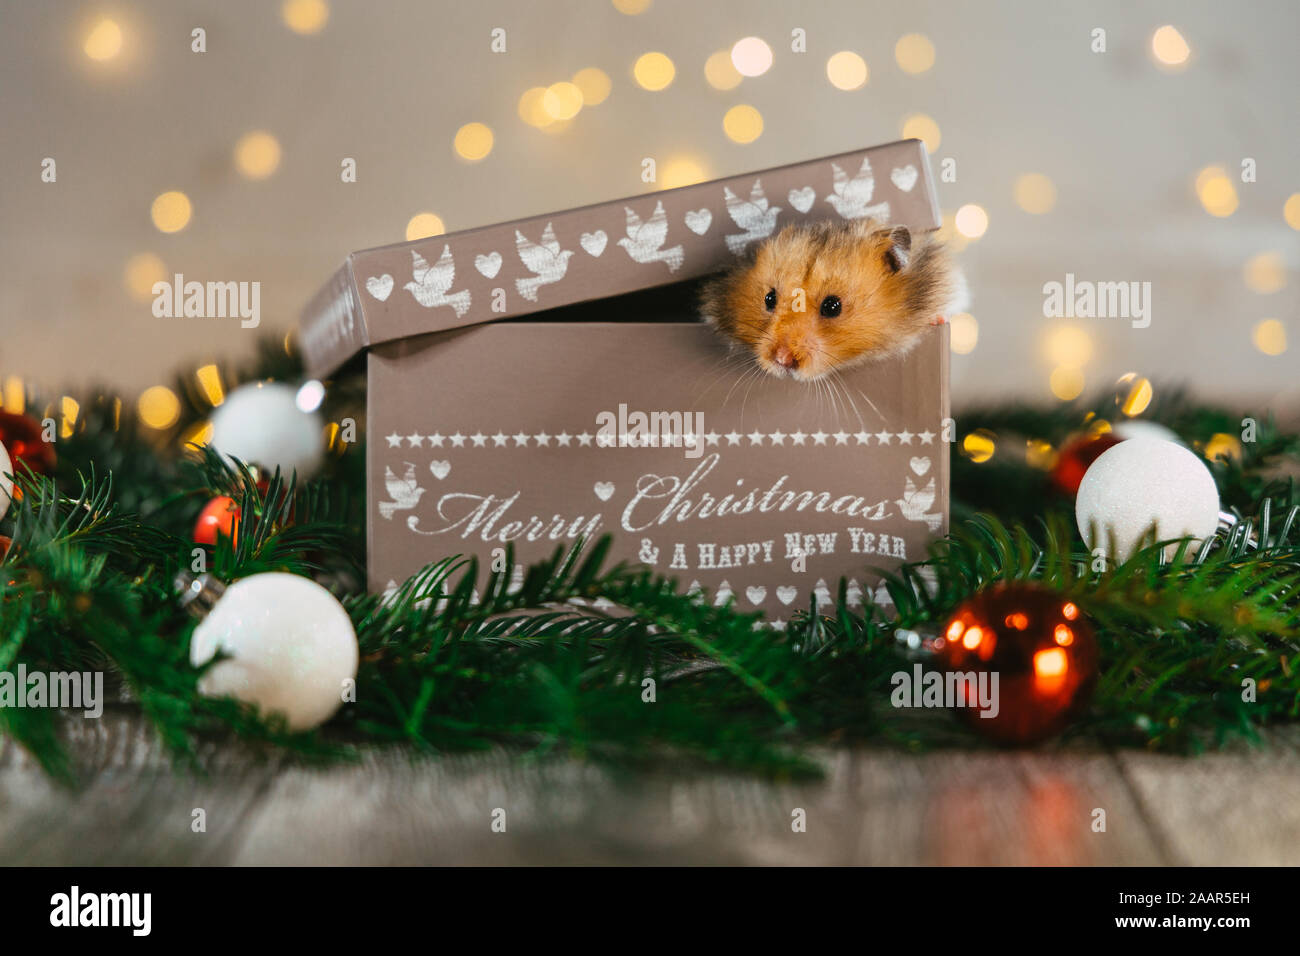 A cute pet hamster poking his head out of a Christmas gift box which is sat on Christmas tree branches and decorations in the festive animal photograph Stock Photo